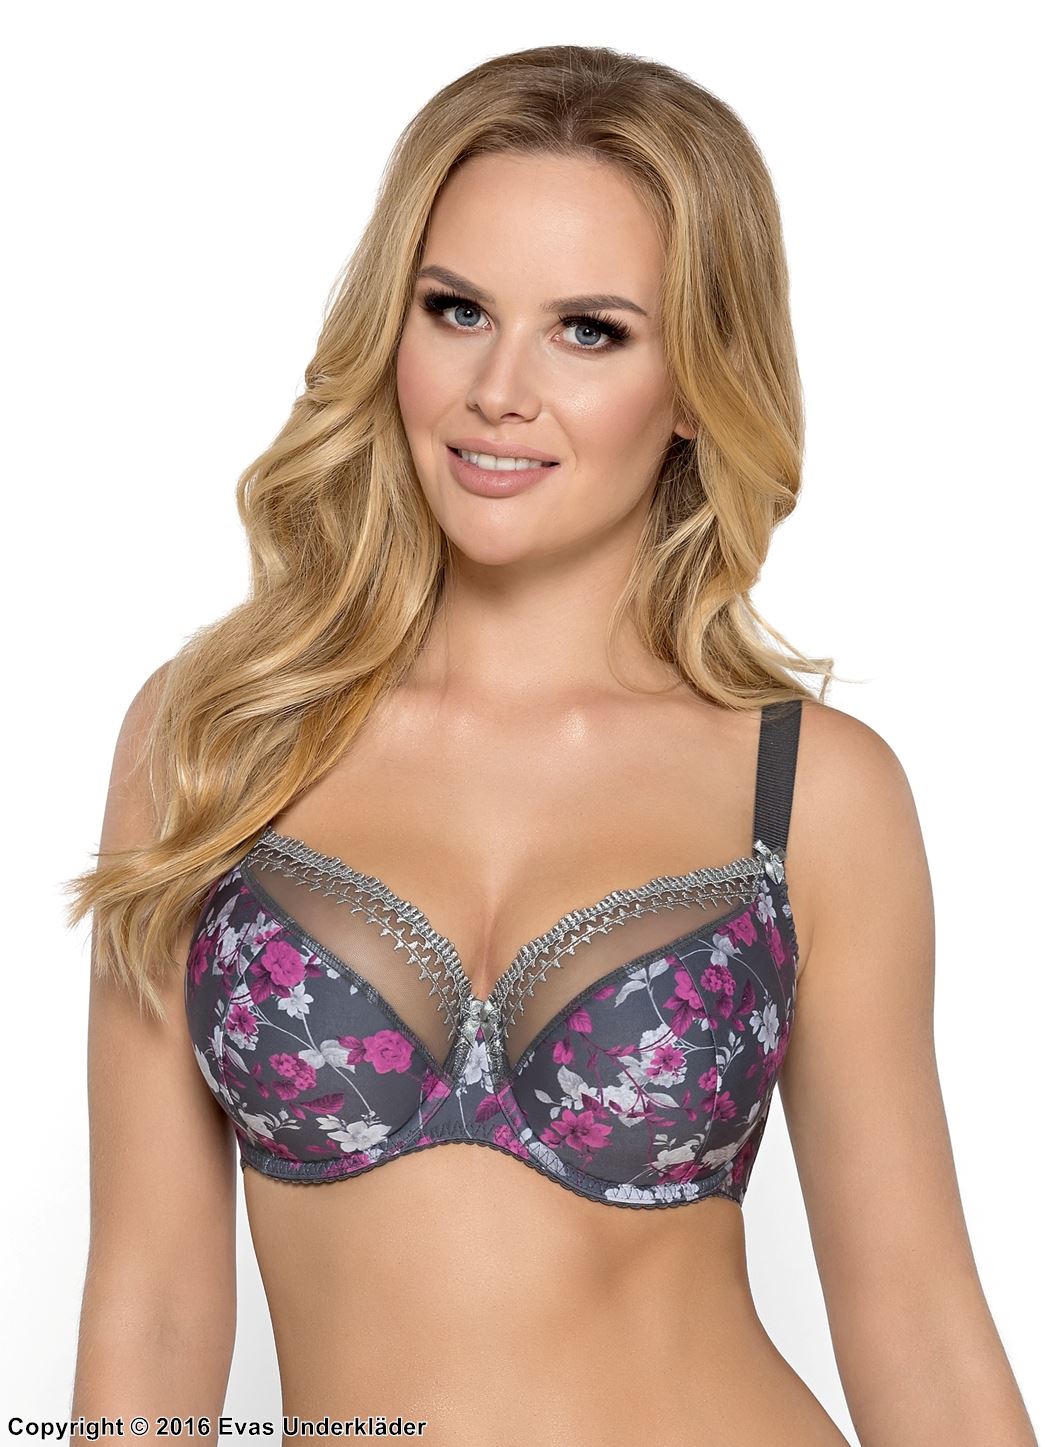 Full cup bra, embroidery, sheer inlays, flowers